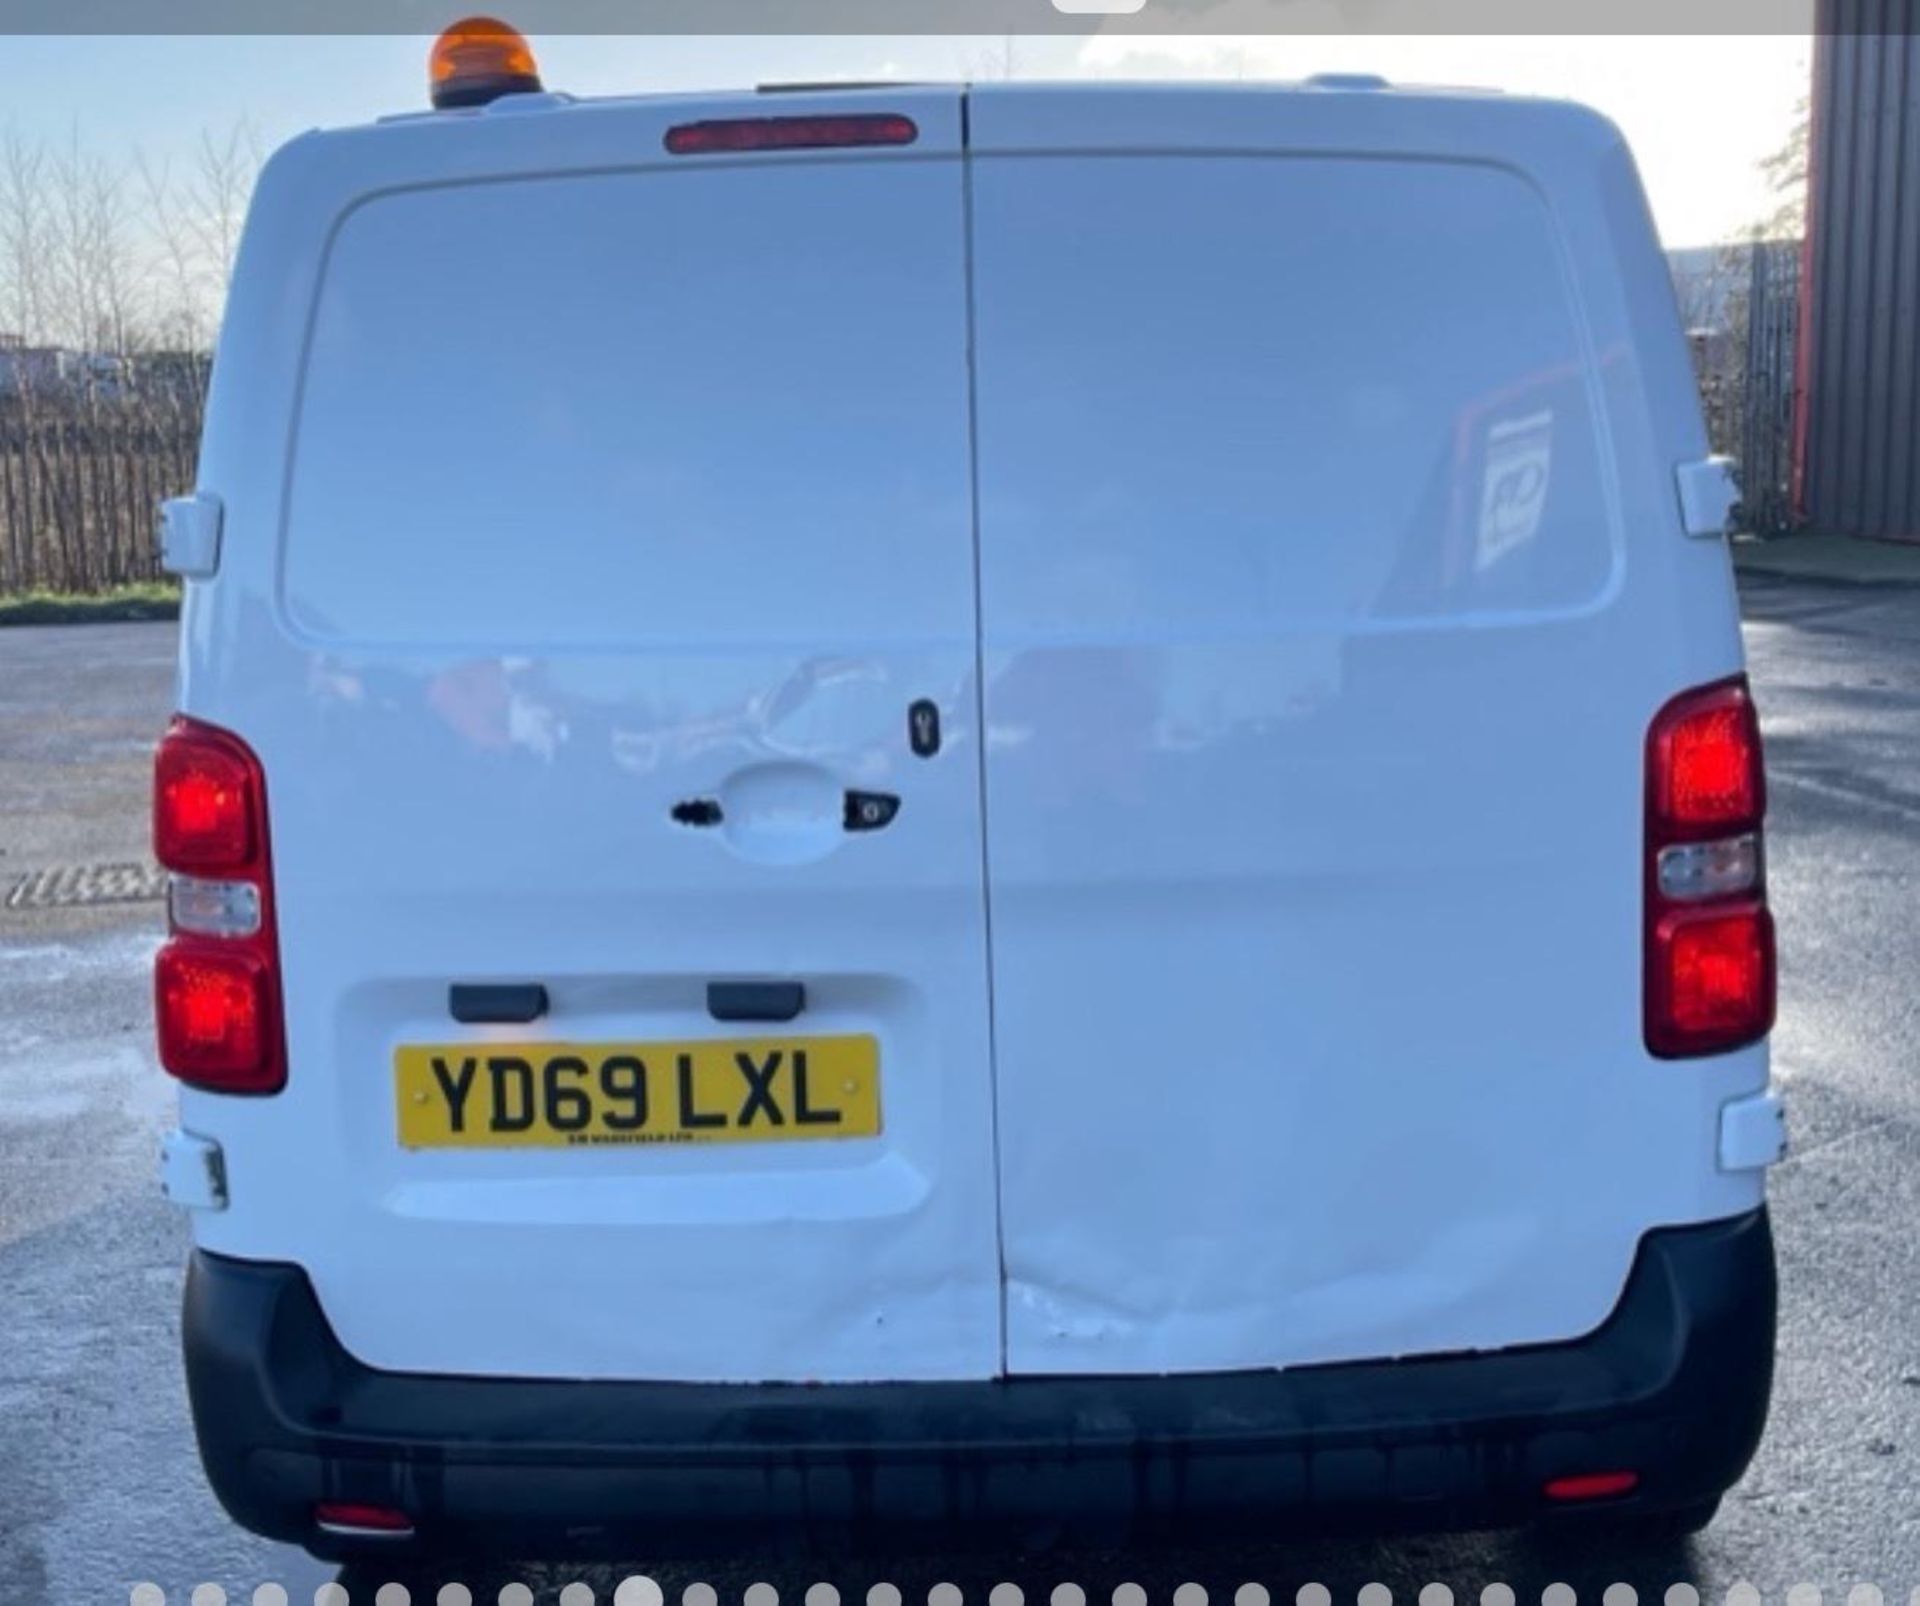 2019 CITROEN DISPATCH 111K MILES -HPI CLEAR -READY FOR WORKE! - Image 3 of 12